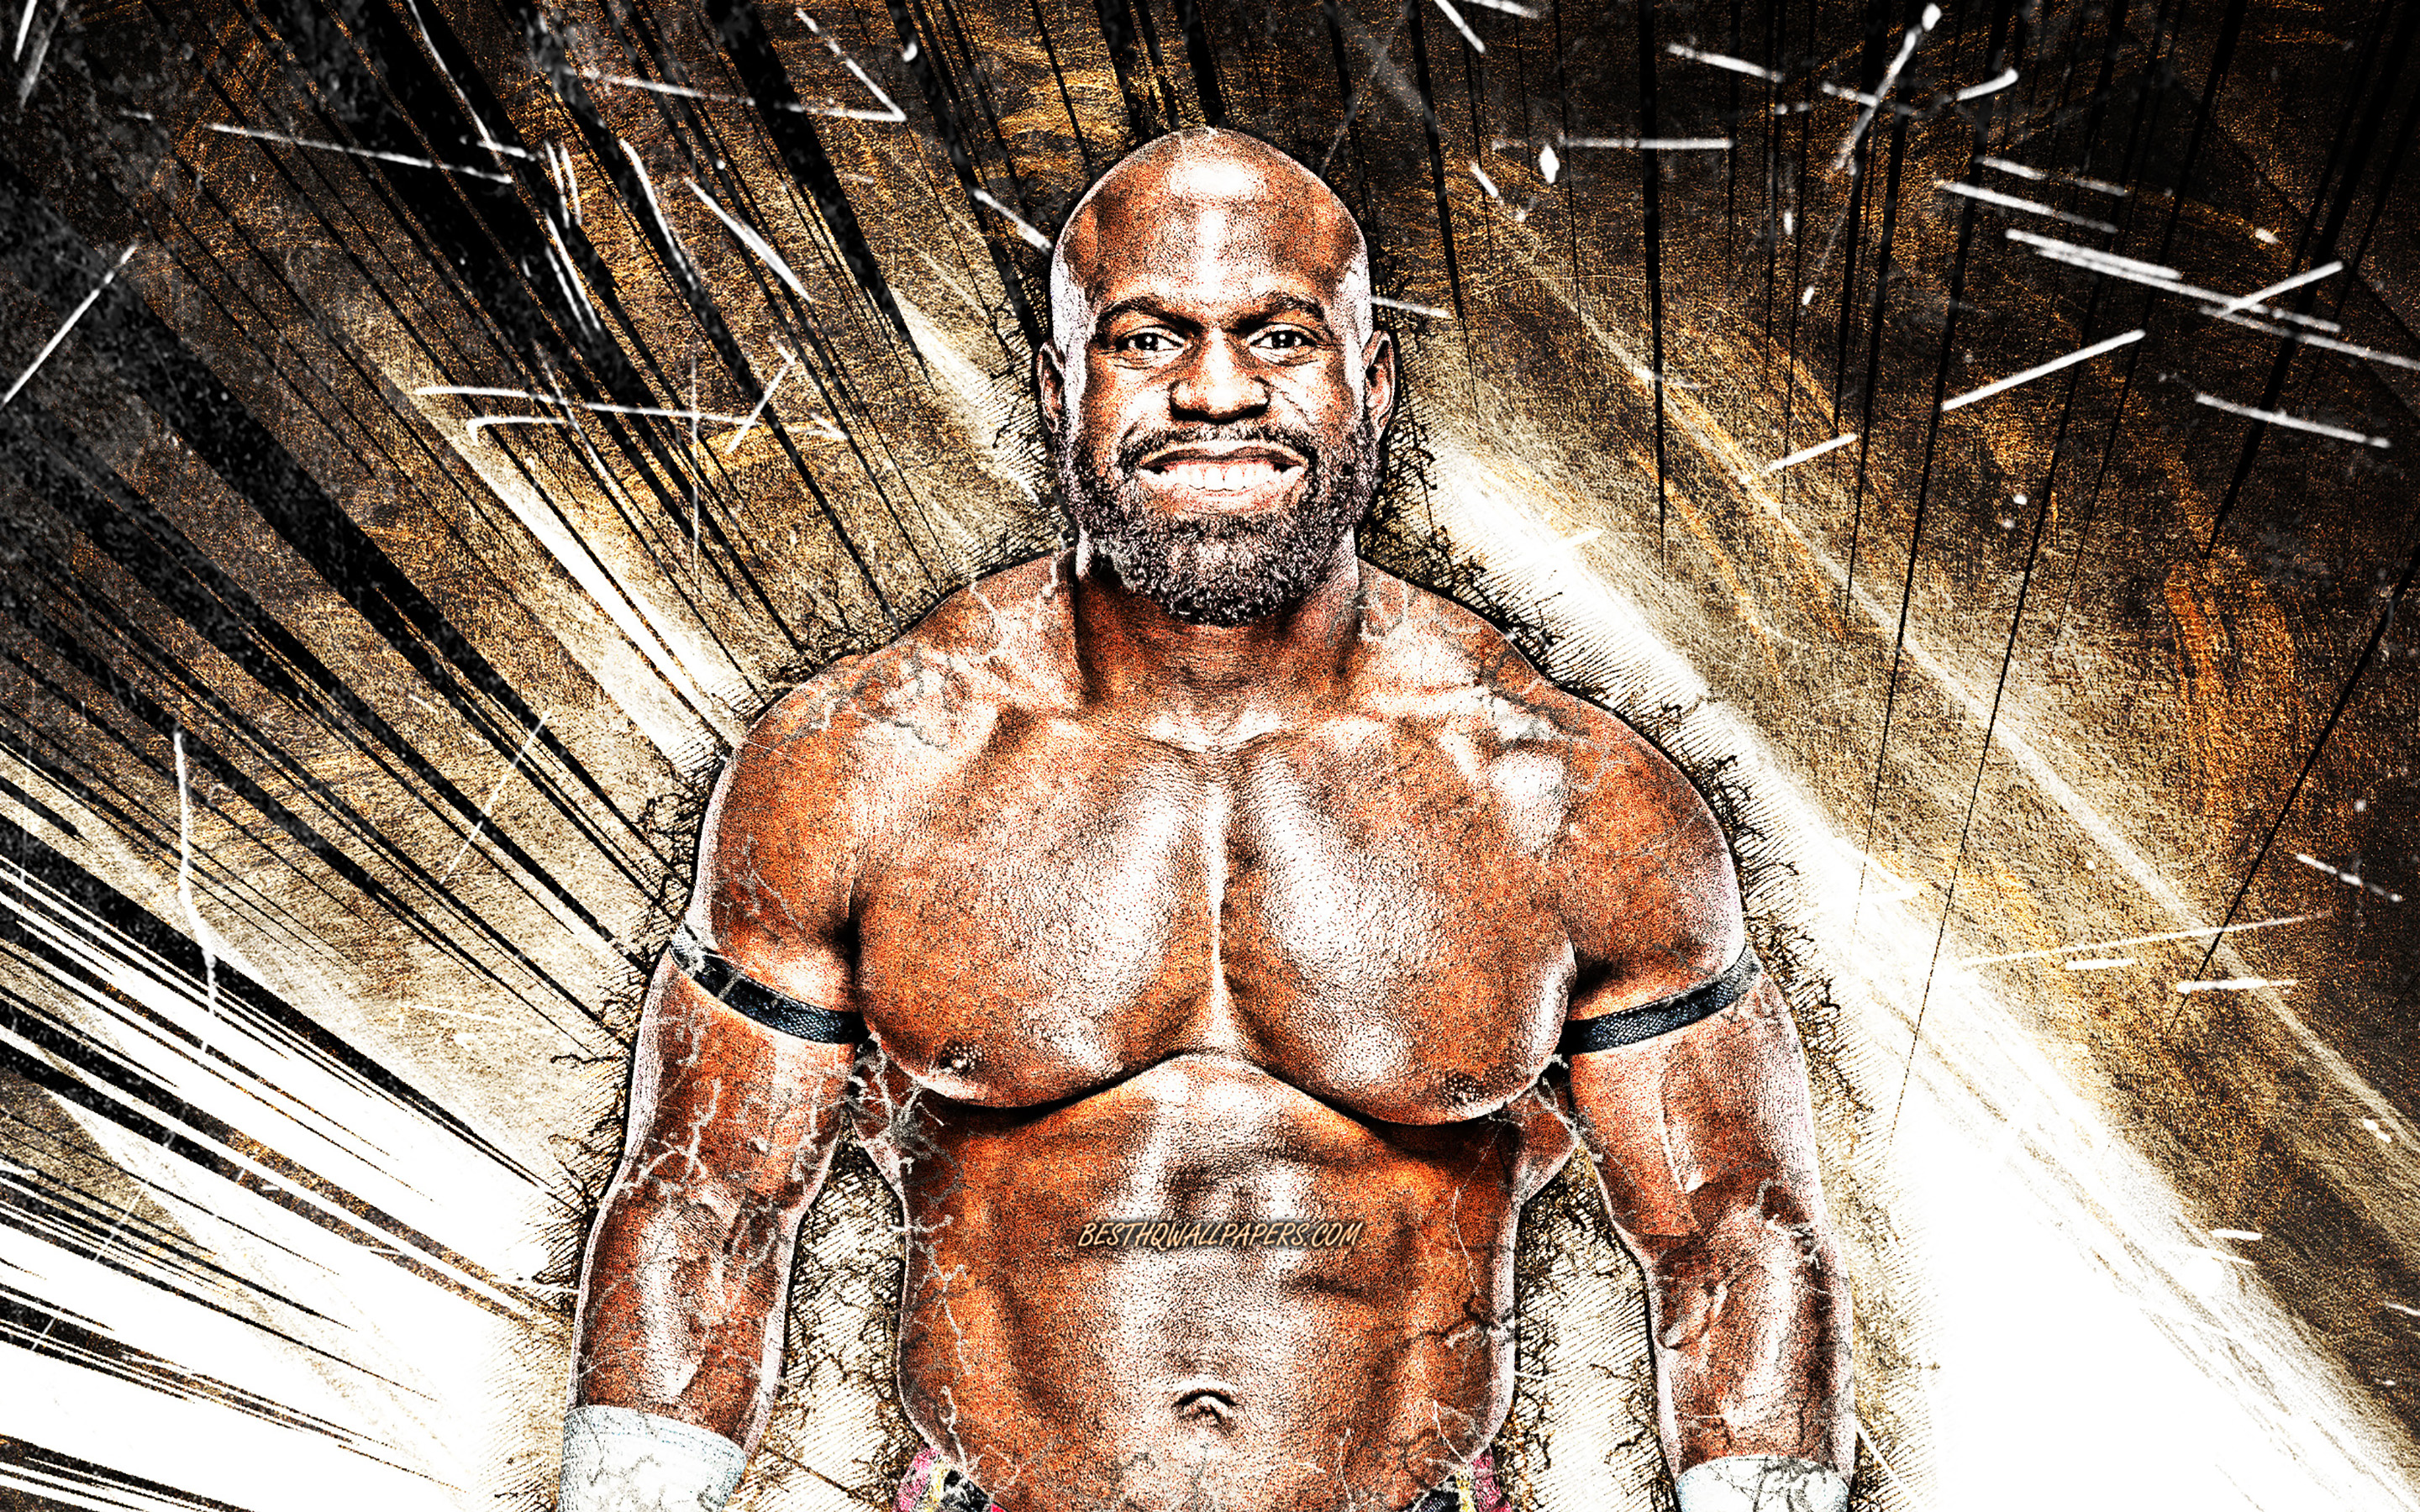 Download wallpaper Apollo Crews, WWE, grunge art, american wrestlers, wrestling, brown abstract rays, Sesugh Uhaa, wrestlers for desktop with resolution 2880x1800. High Quality HD picture wallpaper